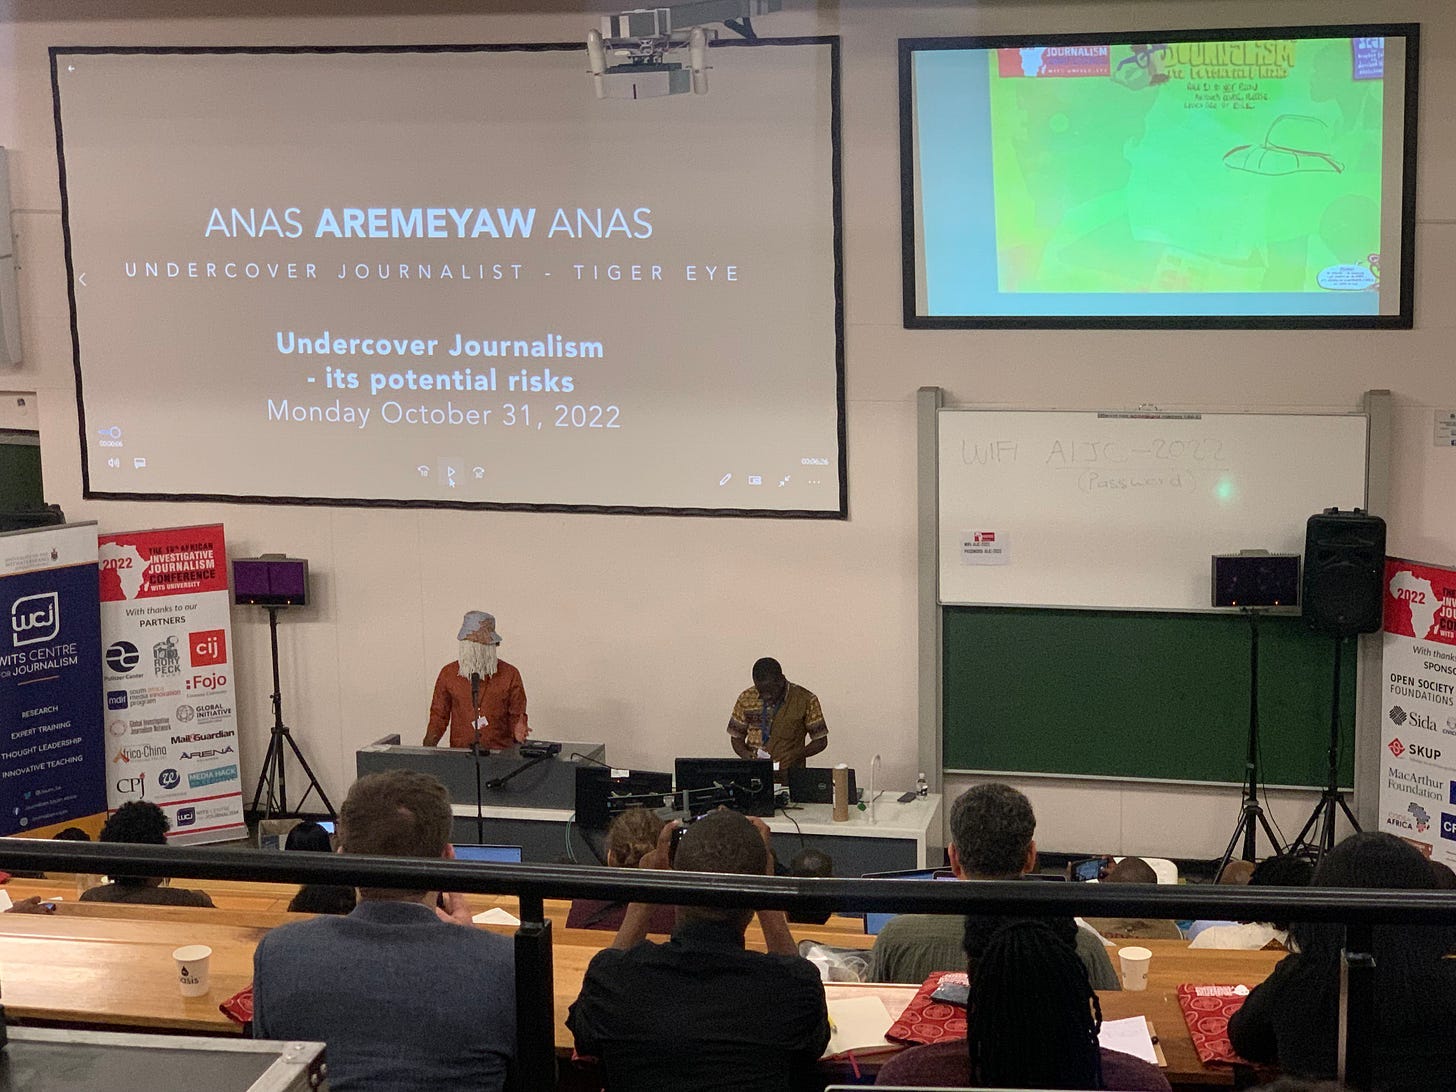 Anas Aremeyaw Anas, 🇬🇭 Under Cover Journalist — Tiger Eye at 18th African Investigative Journalism conference #AIJC Wits University, Johannesburg, South Africa #Mzansi 🇿🇦